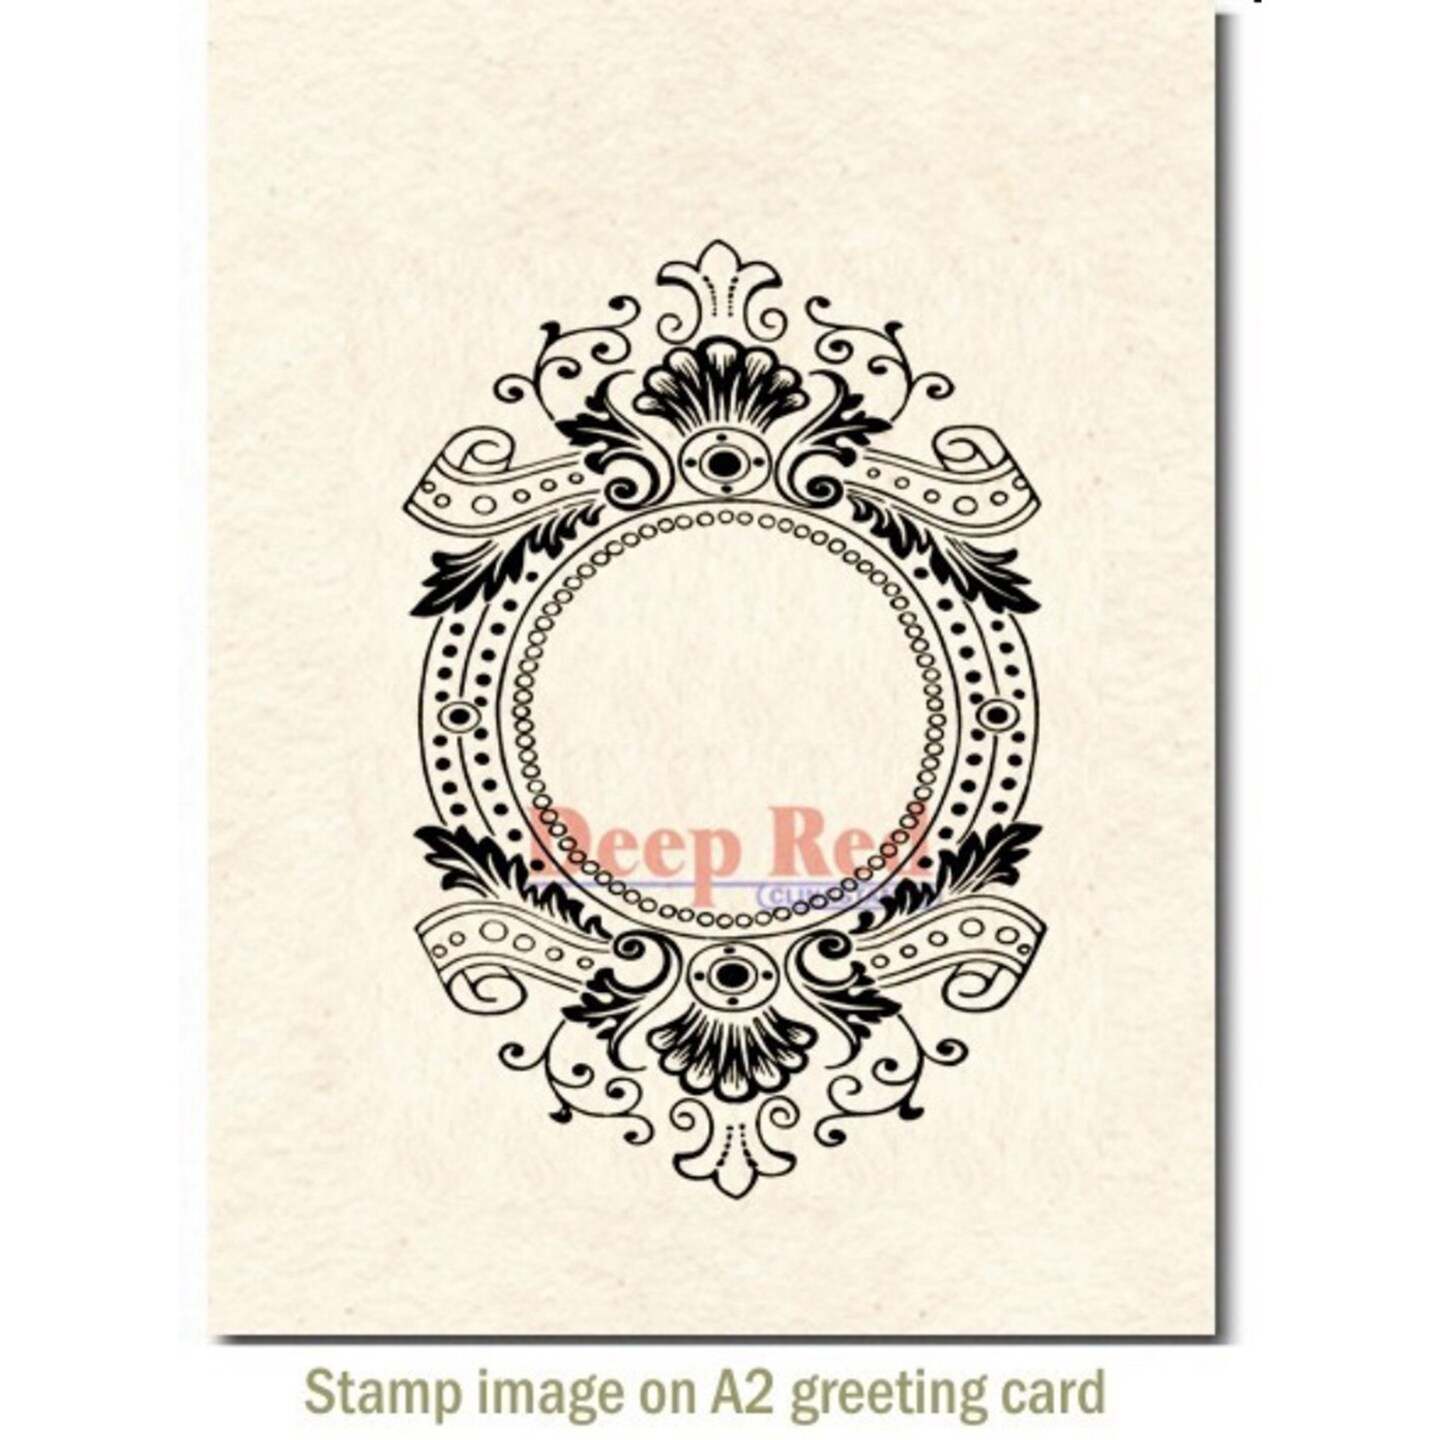 Deep Red Stamps Baroque Frame Rubber Cling Stamp 2.6 x 4 inches